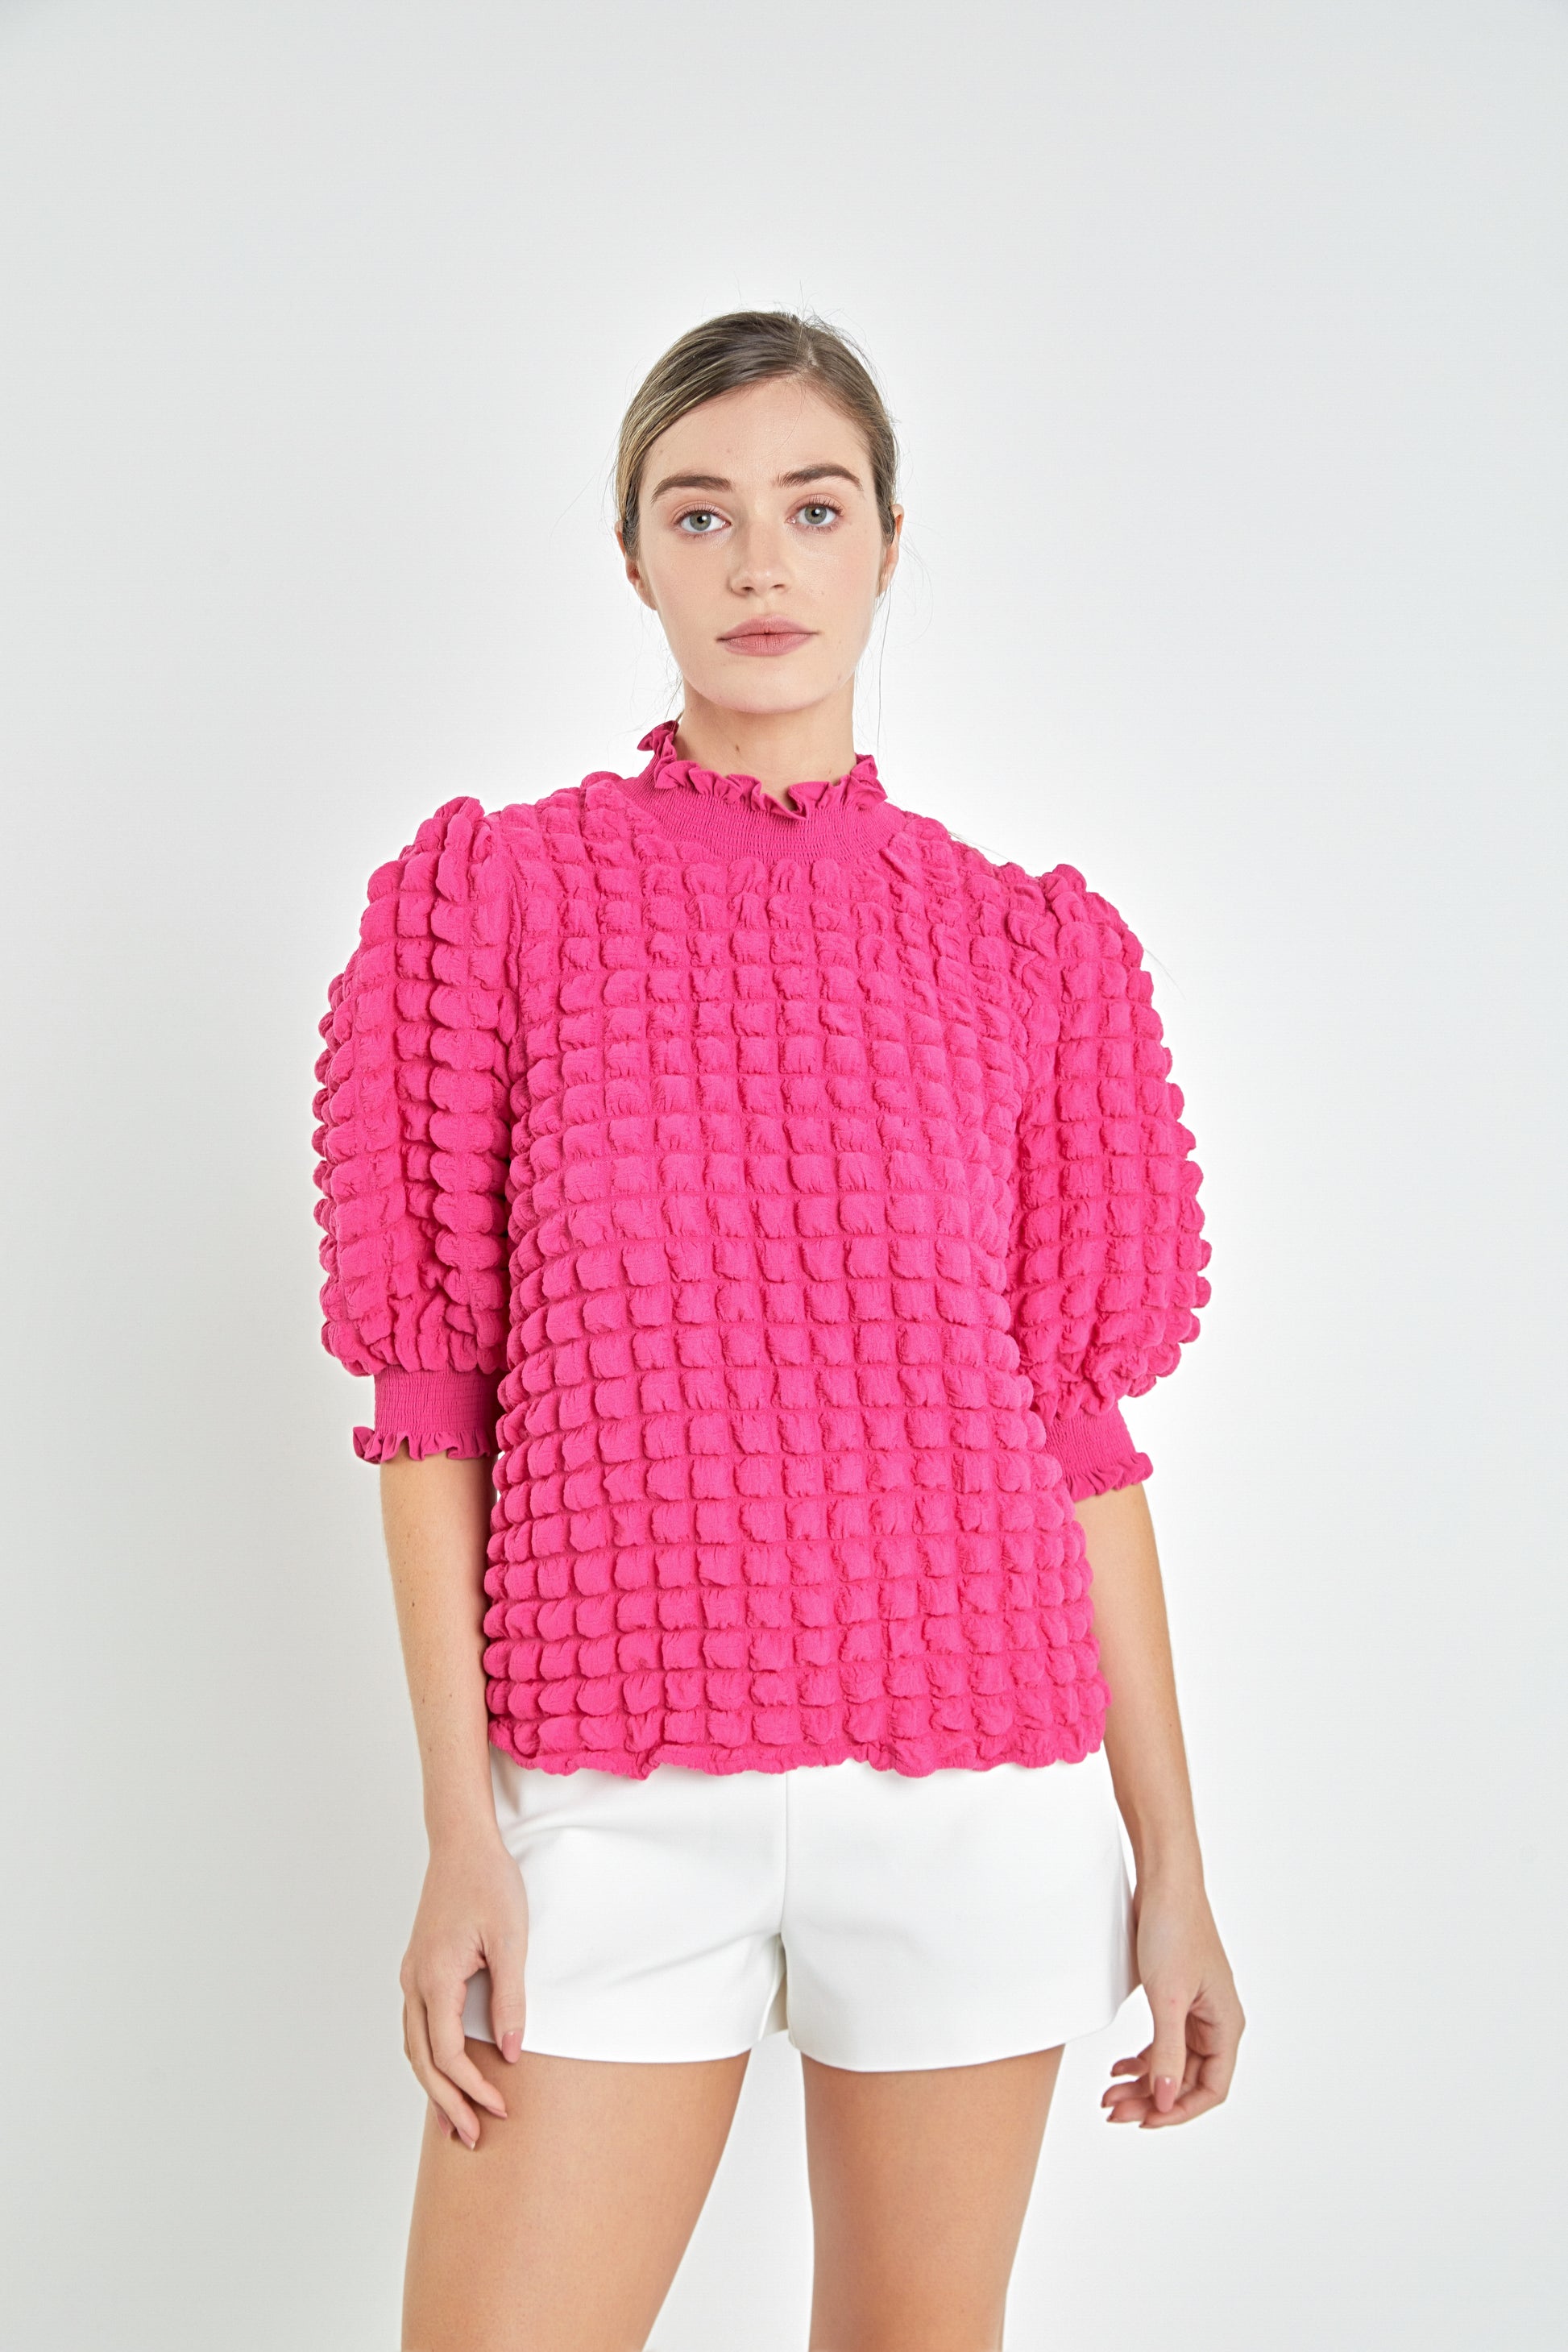 Get ready to stand out in the crowd with our XOXO Top! This hot pink, quilted textured top features playful puff sleeves for a fun and flirty look. Be bold and make a statement wherever you go!